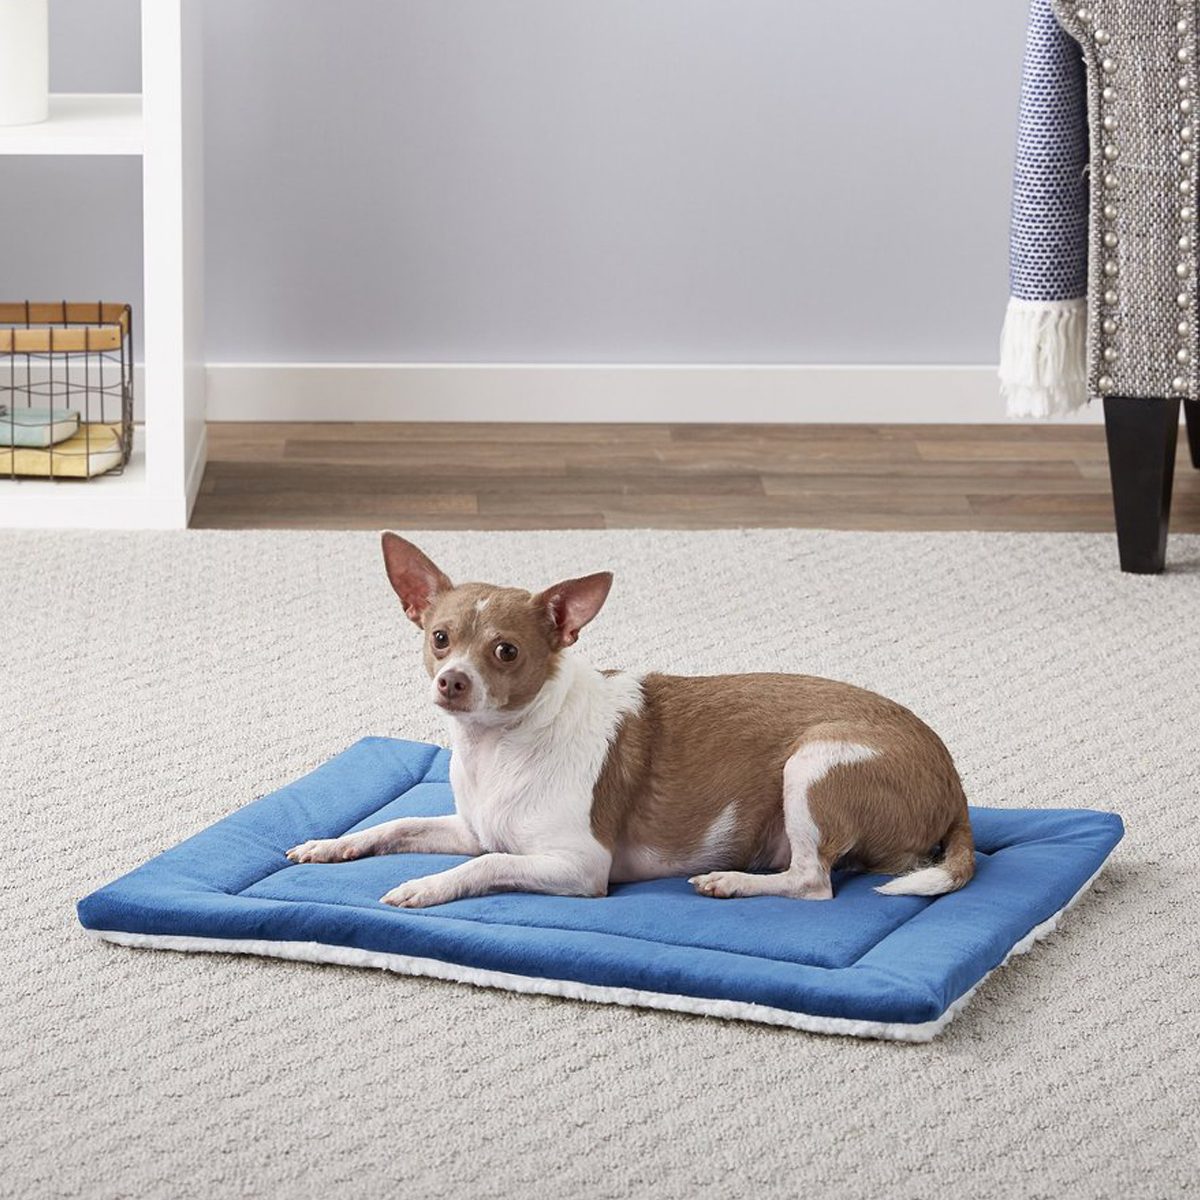 6 Best Heated Dog Beds for Winter